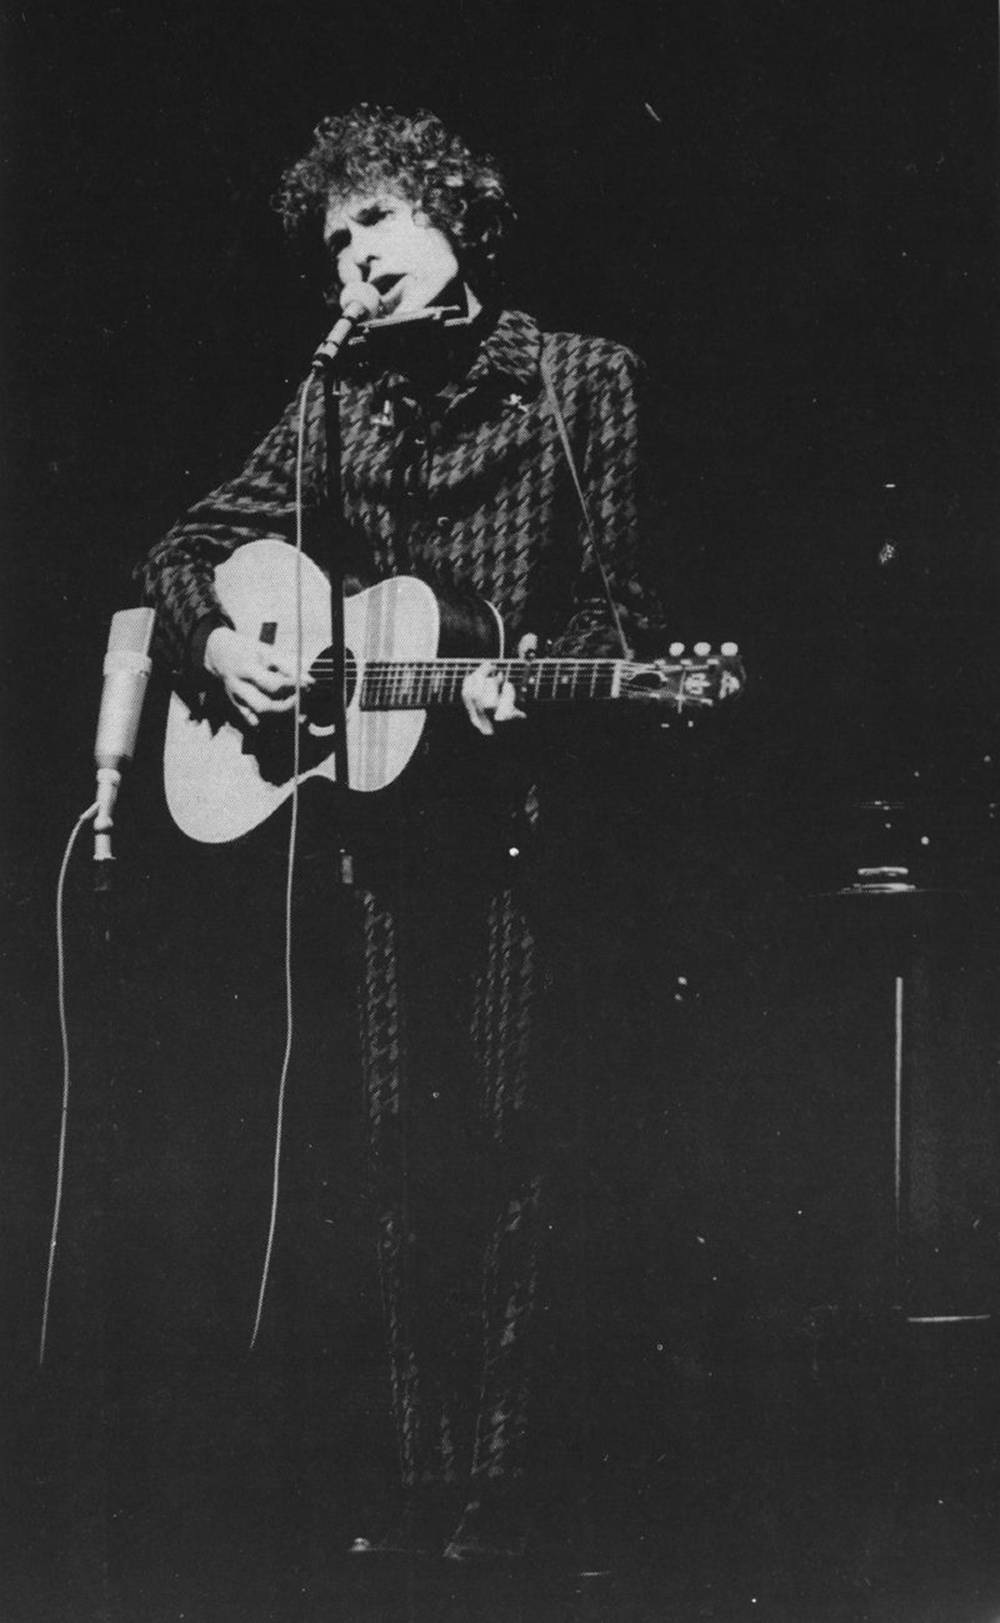 Bob Dylan Stage Performance Black And White Wallpaper